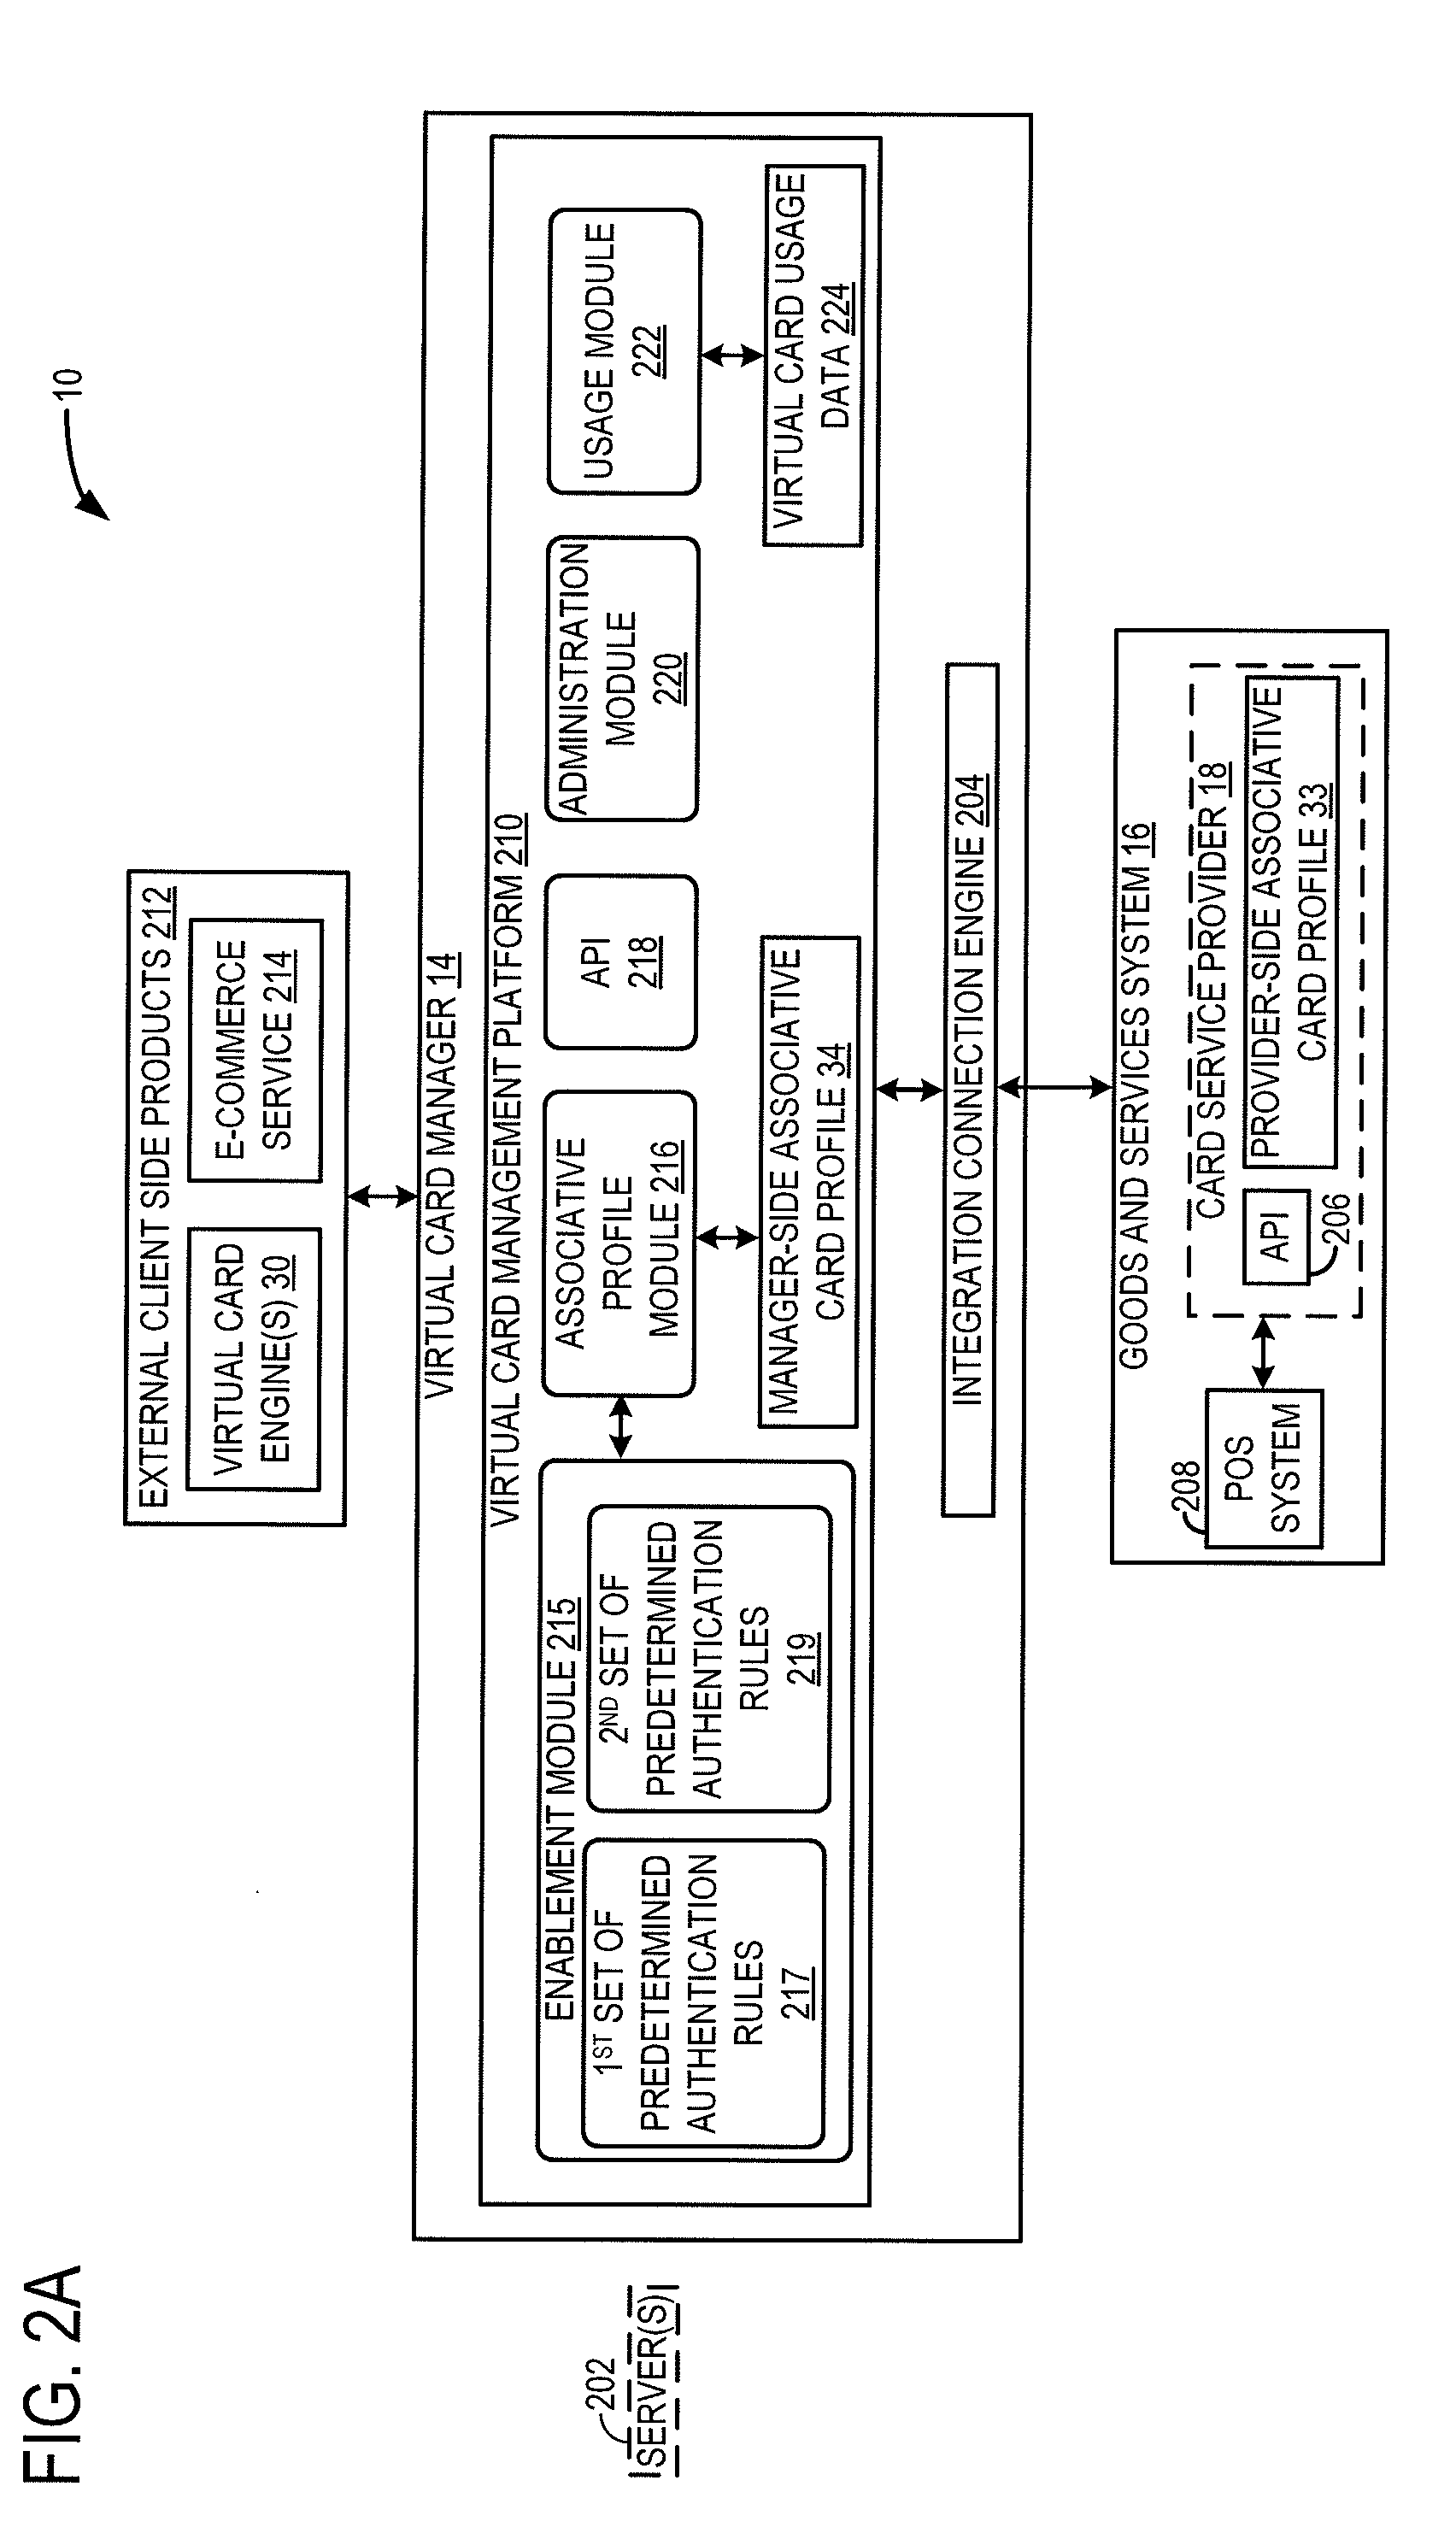 Systems and methods for authentication of a virtual stored value card